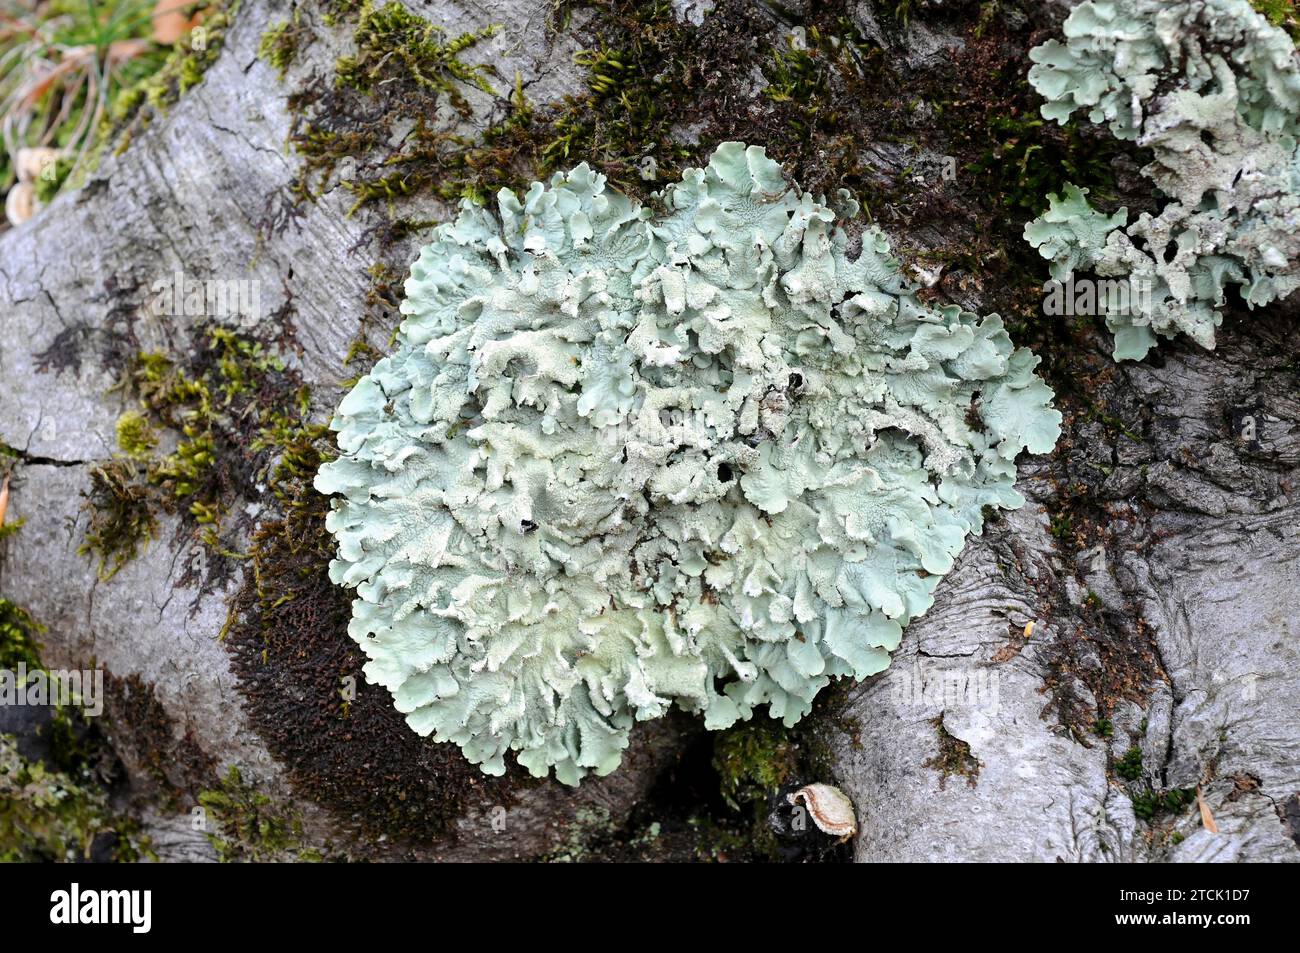 Flavoparmelia caperata or Parmelia caperata is a foliose lichen tahat grows on a beech bark. This photo was taken in Montseny Biosphere Reserve, Barce Stock Photo